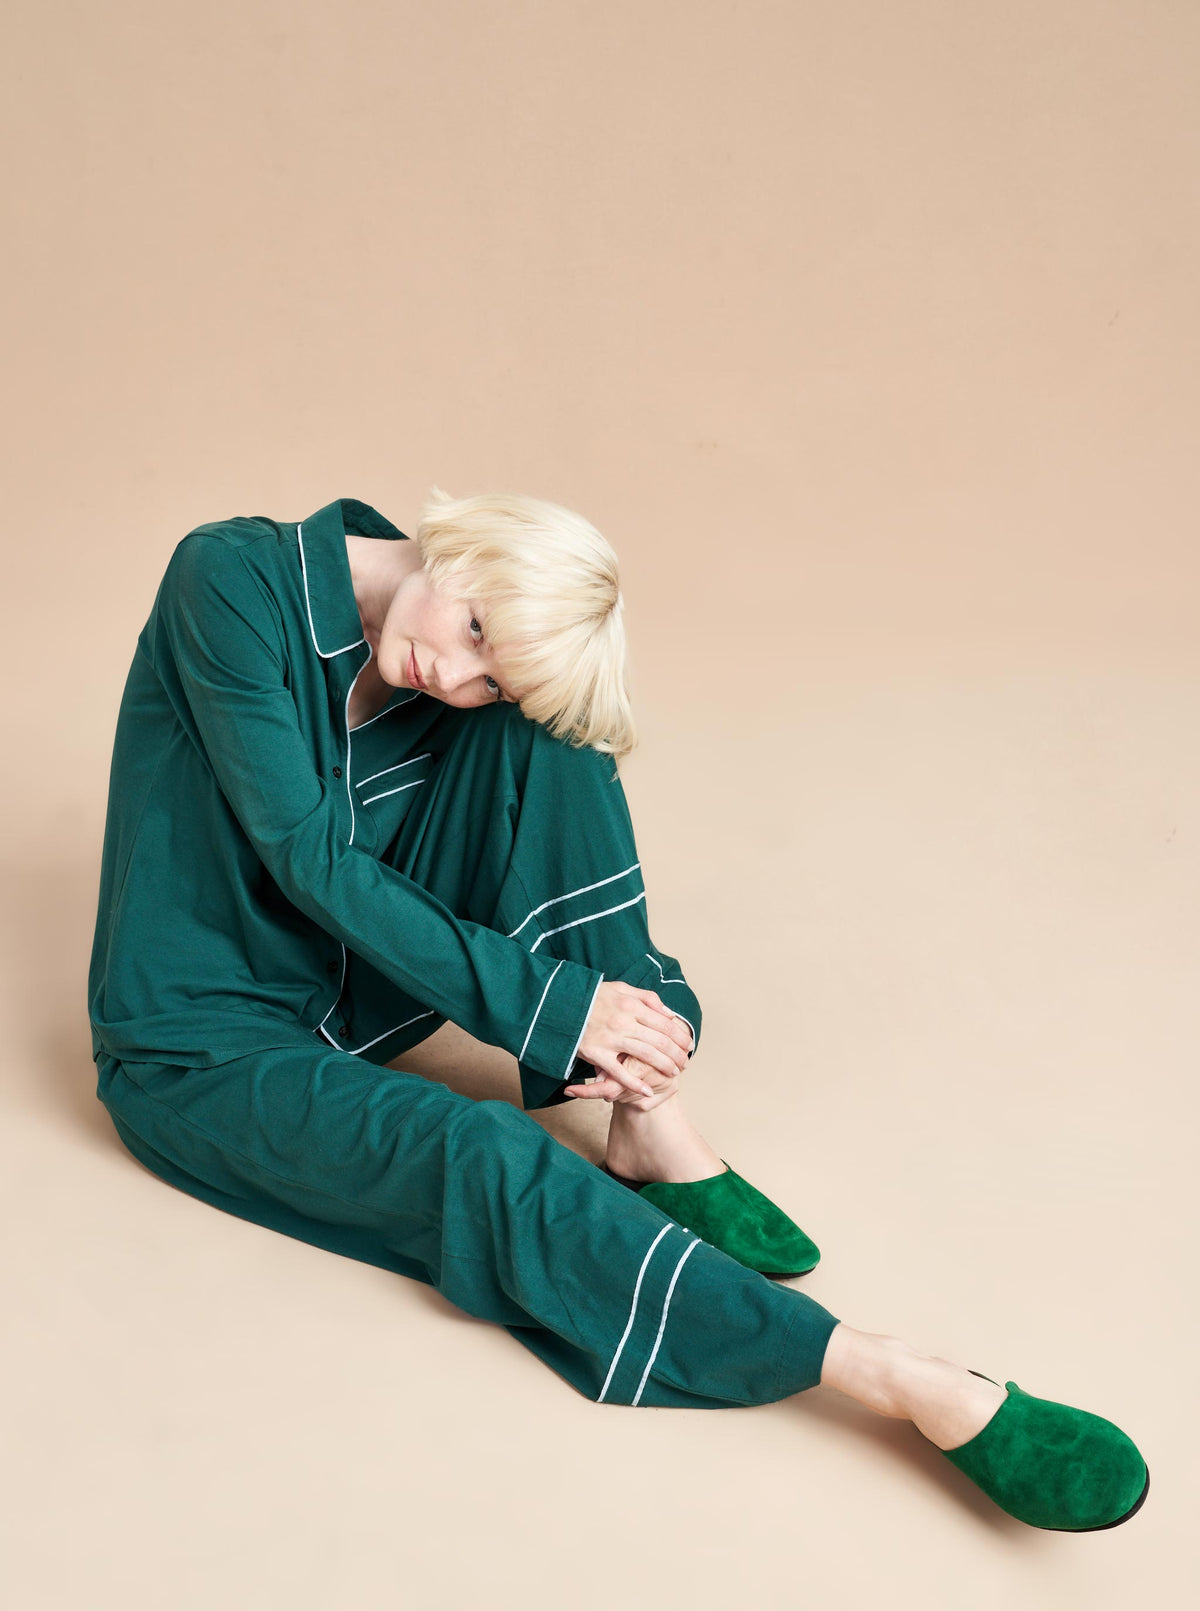 Pajama party ready. Our PJs are cut from our super soft t-shirt fabric for the ultimate in comfort and style when you need a little hygge. Forest green cotton framed with contrasting periwinkle piping, our PJ set has a relaxed-fit top and elasticated drawstring wide-leg pants.